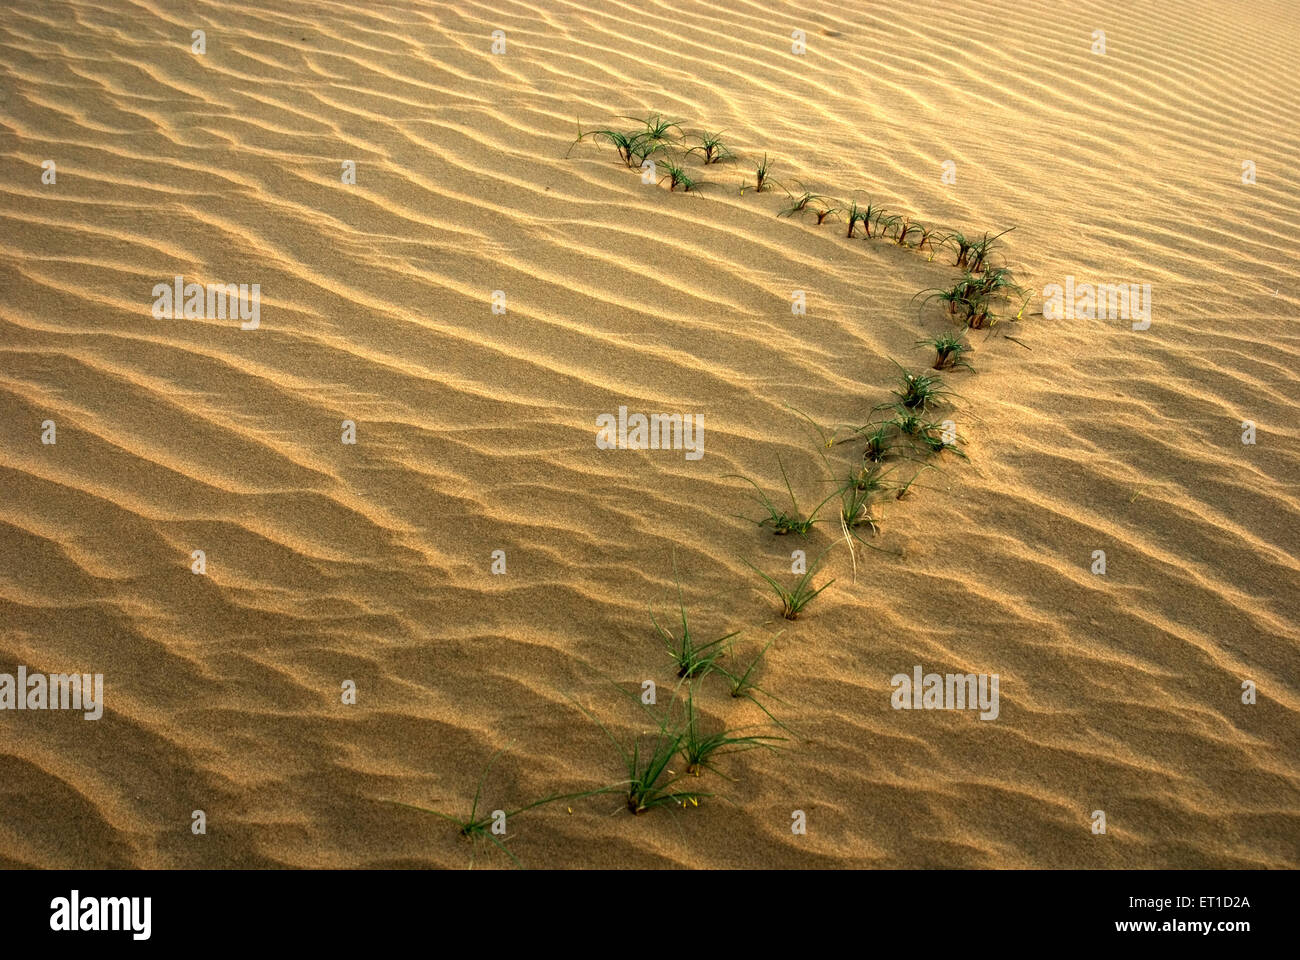 Deep ripples and ridges of sand with grass in desert of khuhri ; Jaisalmer ; Rajasthan ; India Stock Photo